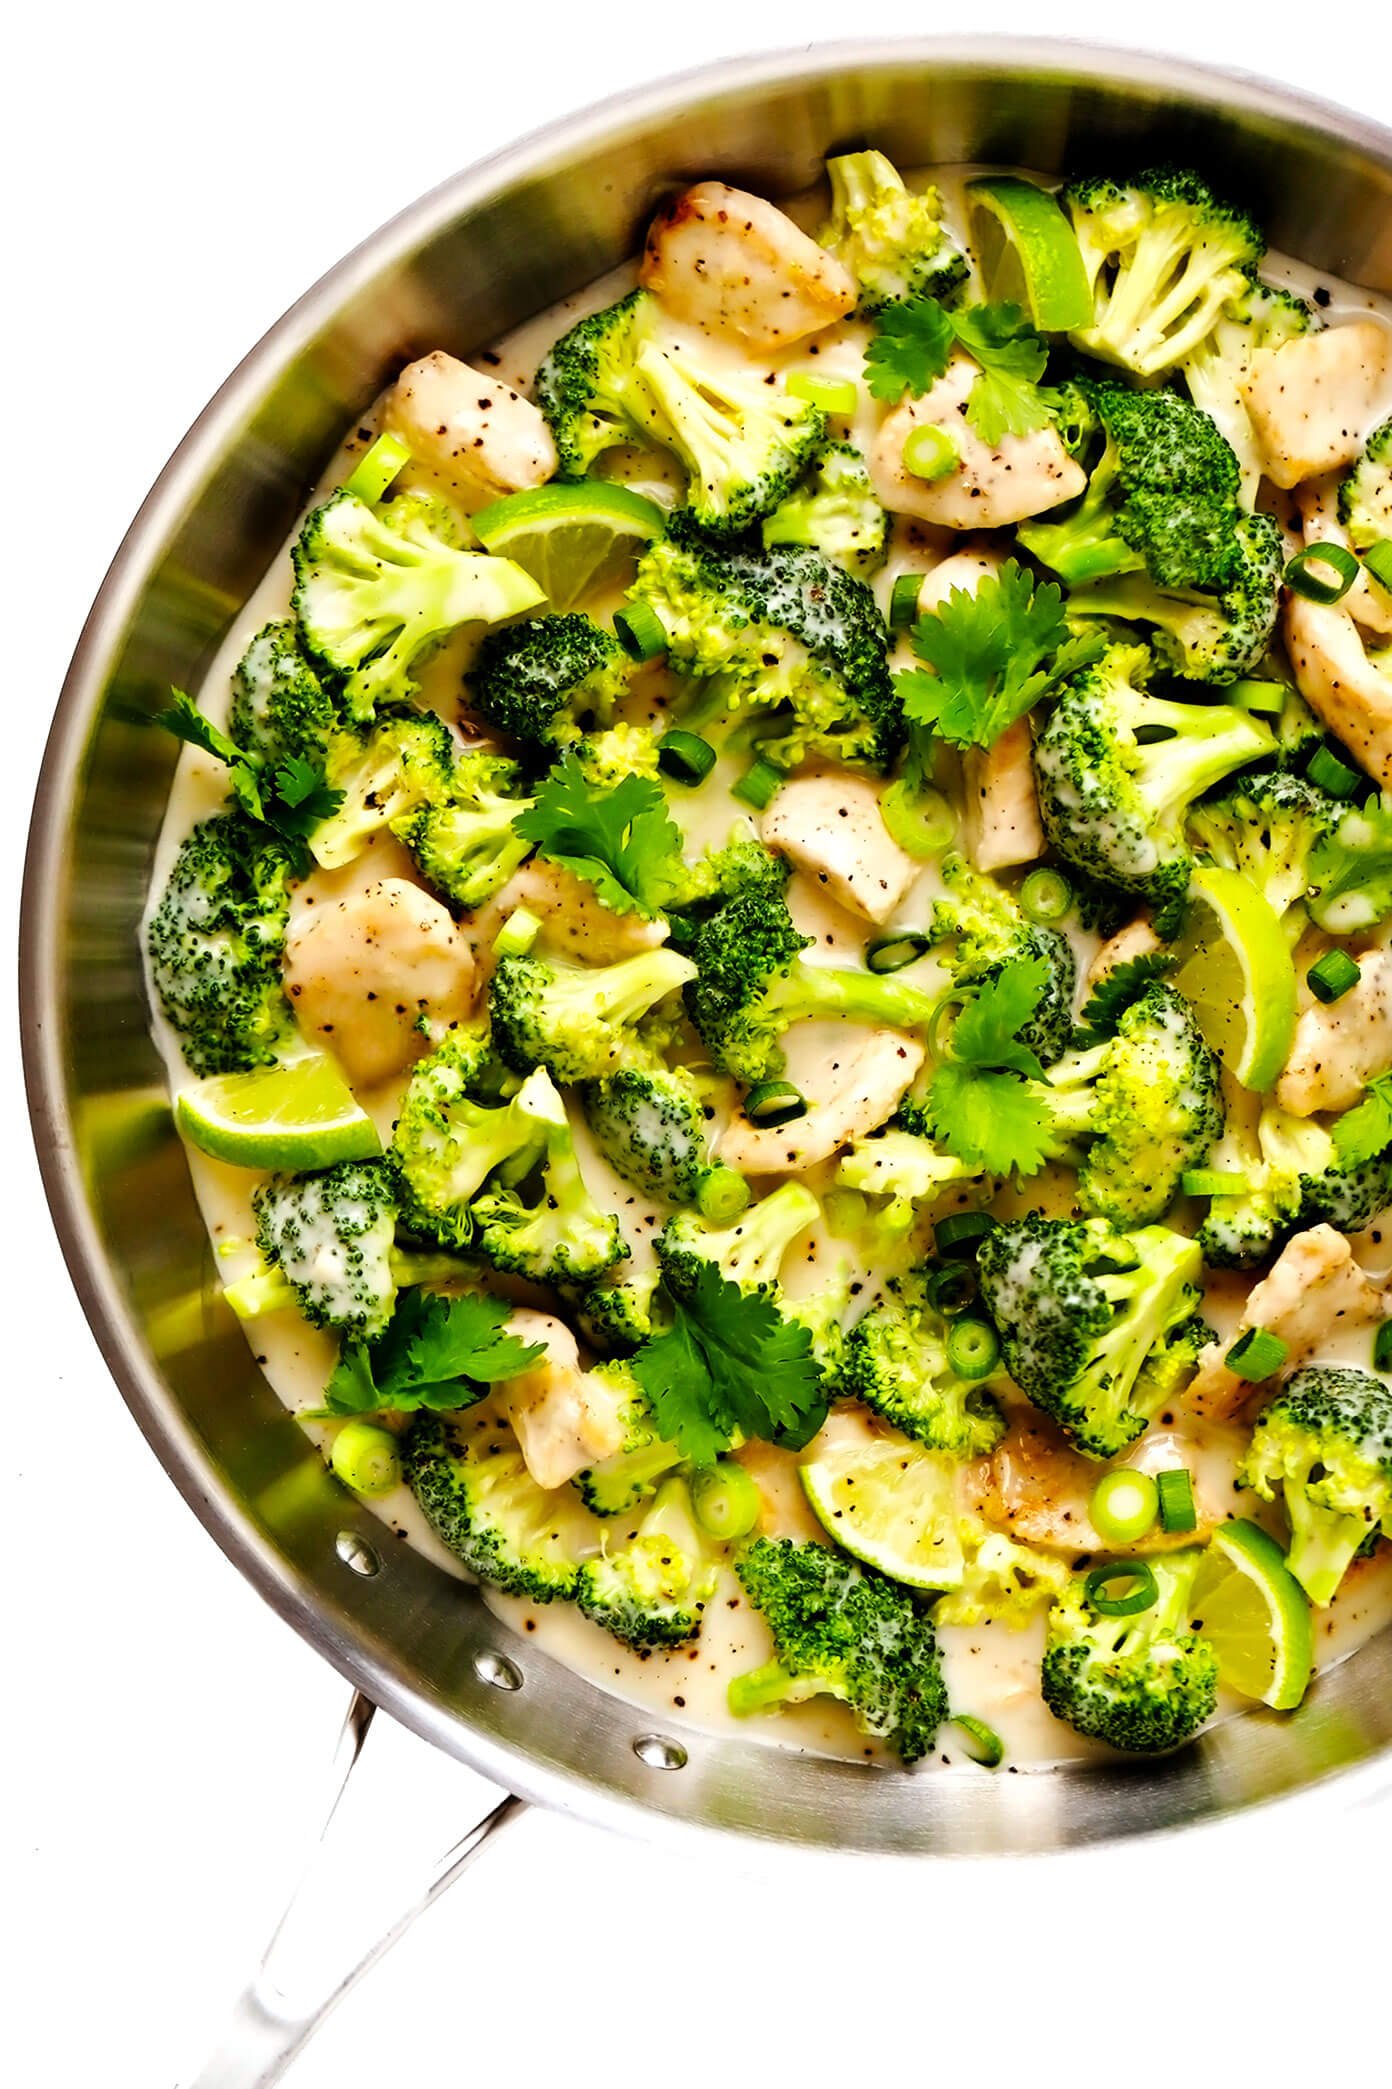 Chicken and Broccoli with Coconut Lime Sauce in Saute Pan